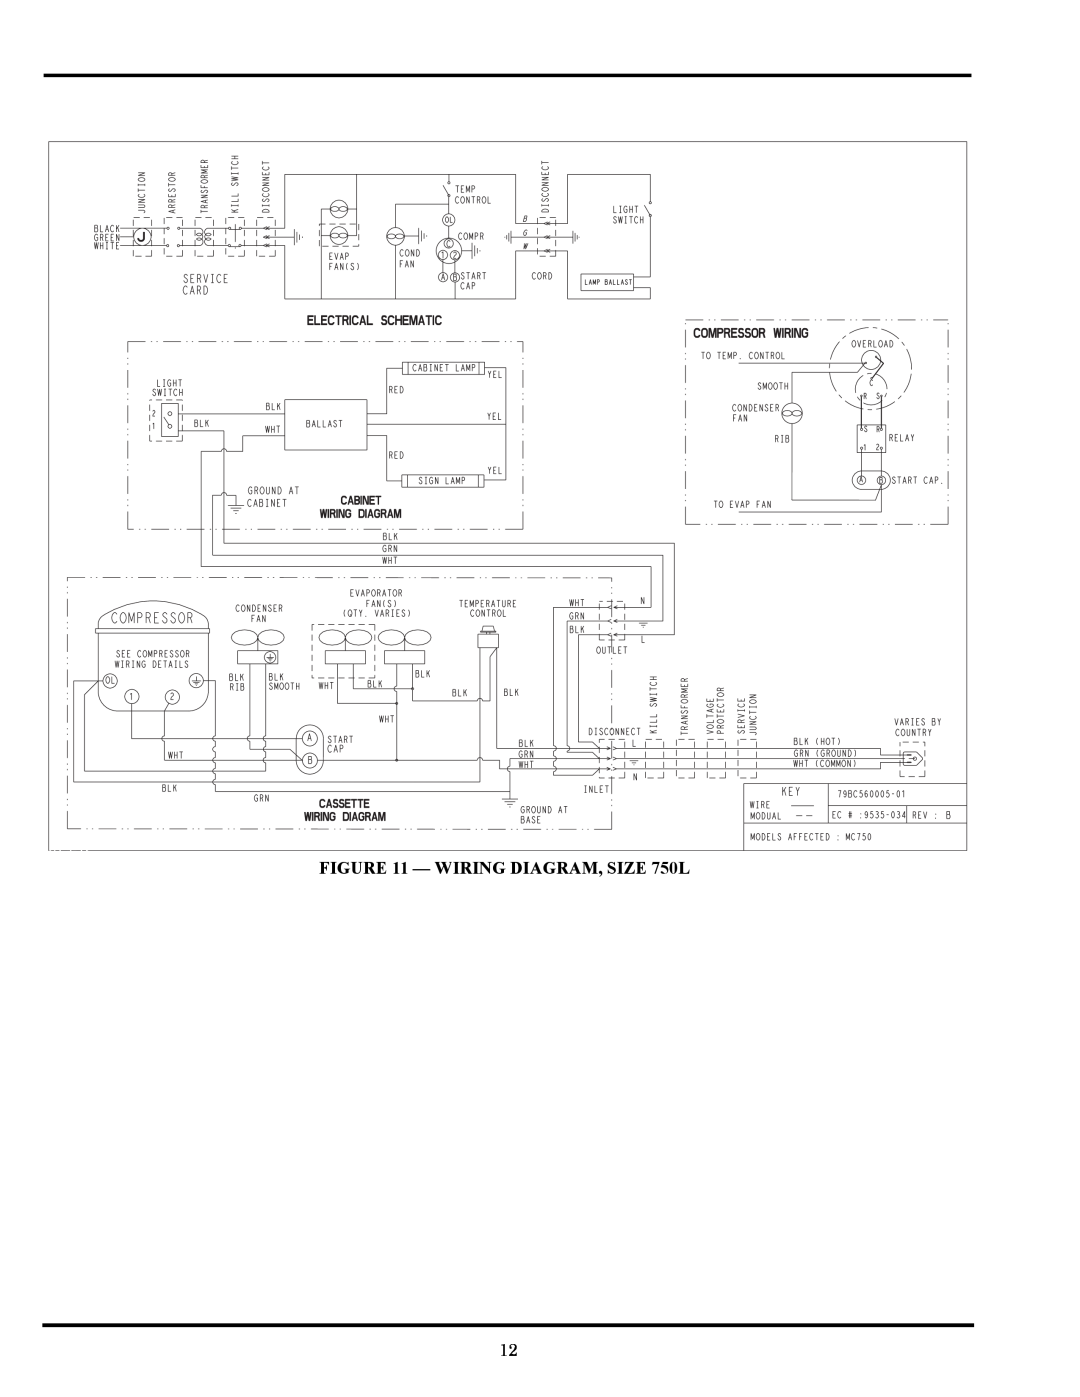 Carrier 260L, 1300L owner manual WIRING DIAGRAM, SIZE 750L, a79-12 